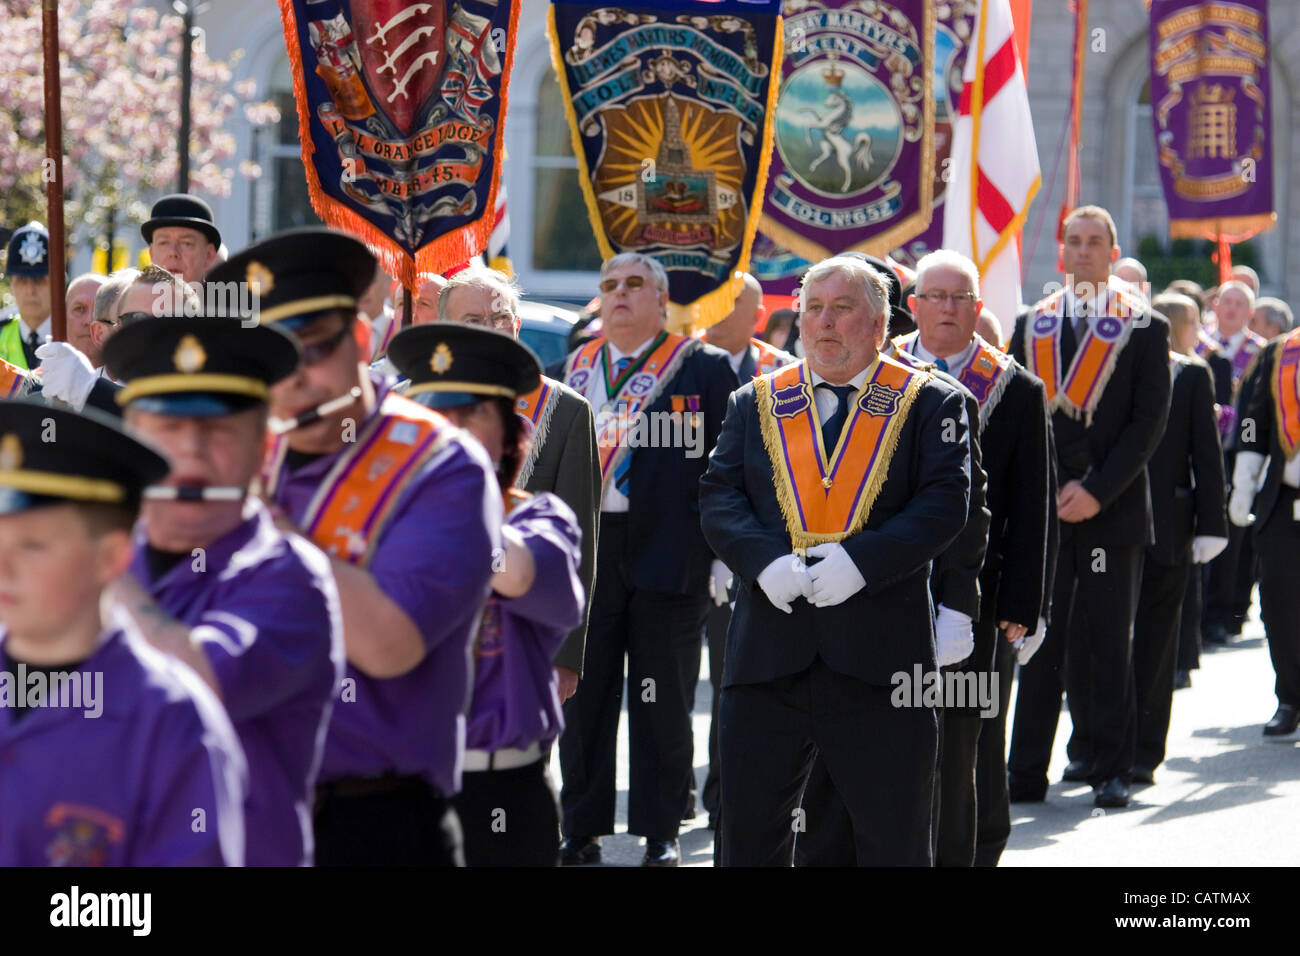 21/04/2012 London UK protestants of the Orange Order march through Central London today, the Orange Lodge, or the Orangemen loyal orange order marching through London Stock Photo